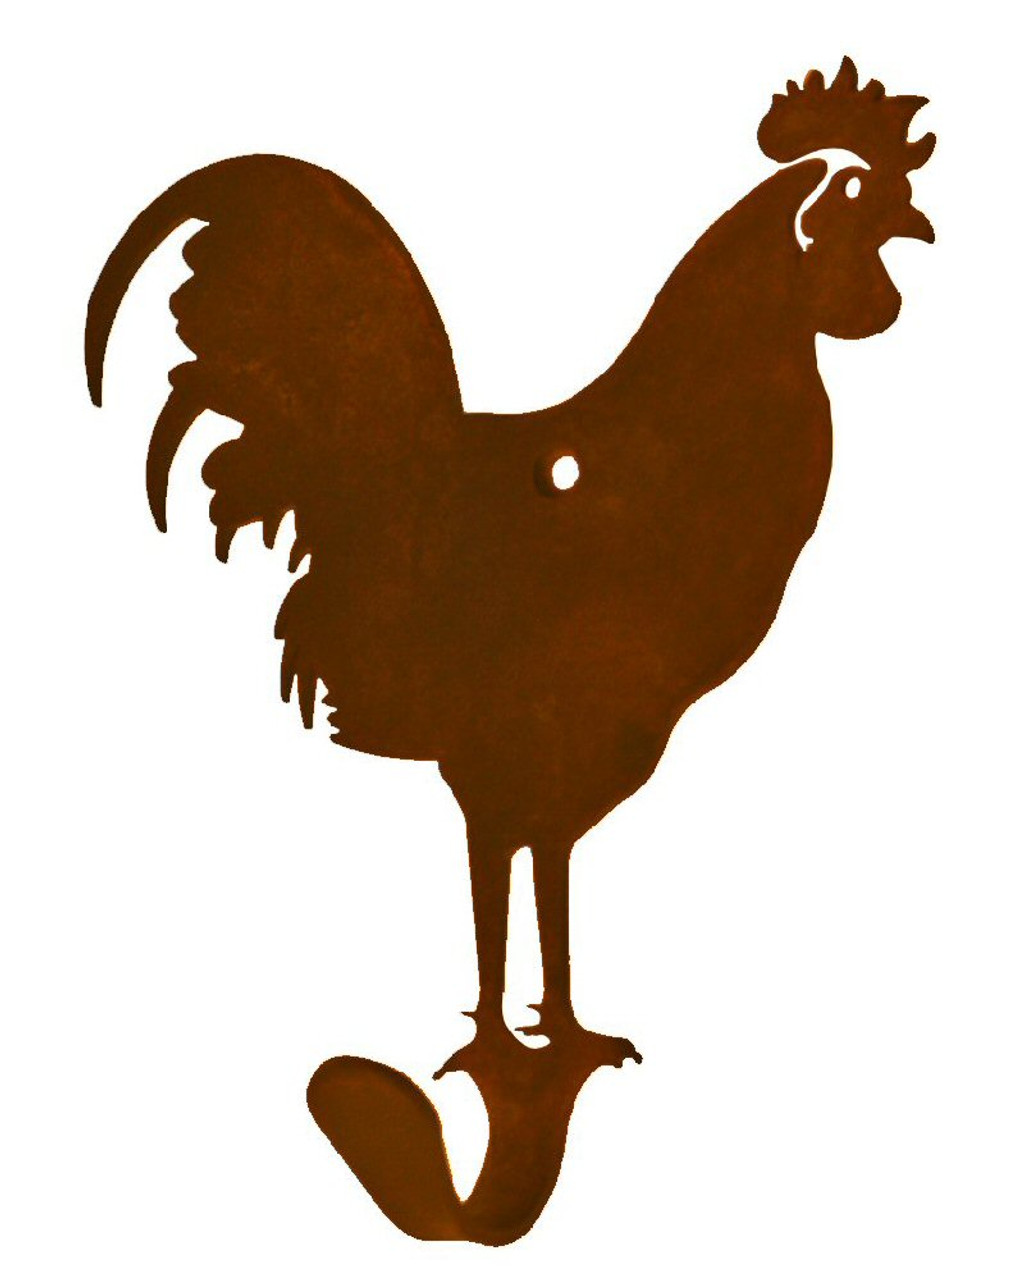 https://cdn11.bigcommerce.com/s-oo0gdojvjo/images/stencil/1280x1280/products/23688/33538/rooster-small-single-metal-wall-hook-ch-5170__72203.1537619977.jpg?c=2&imbypass=on